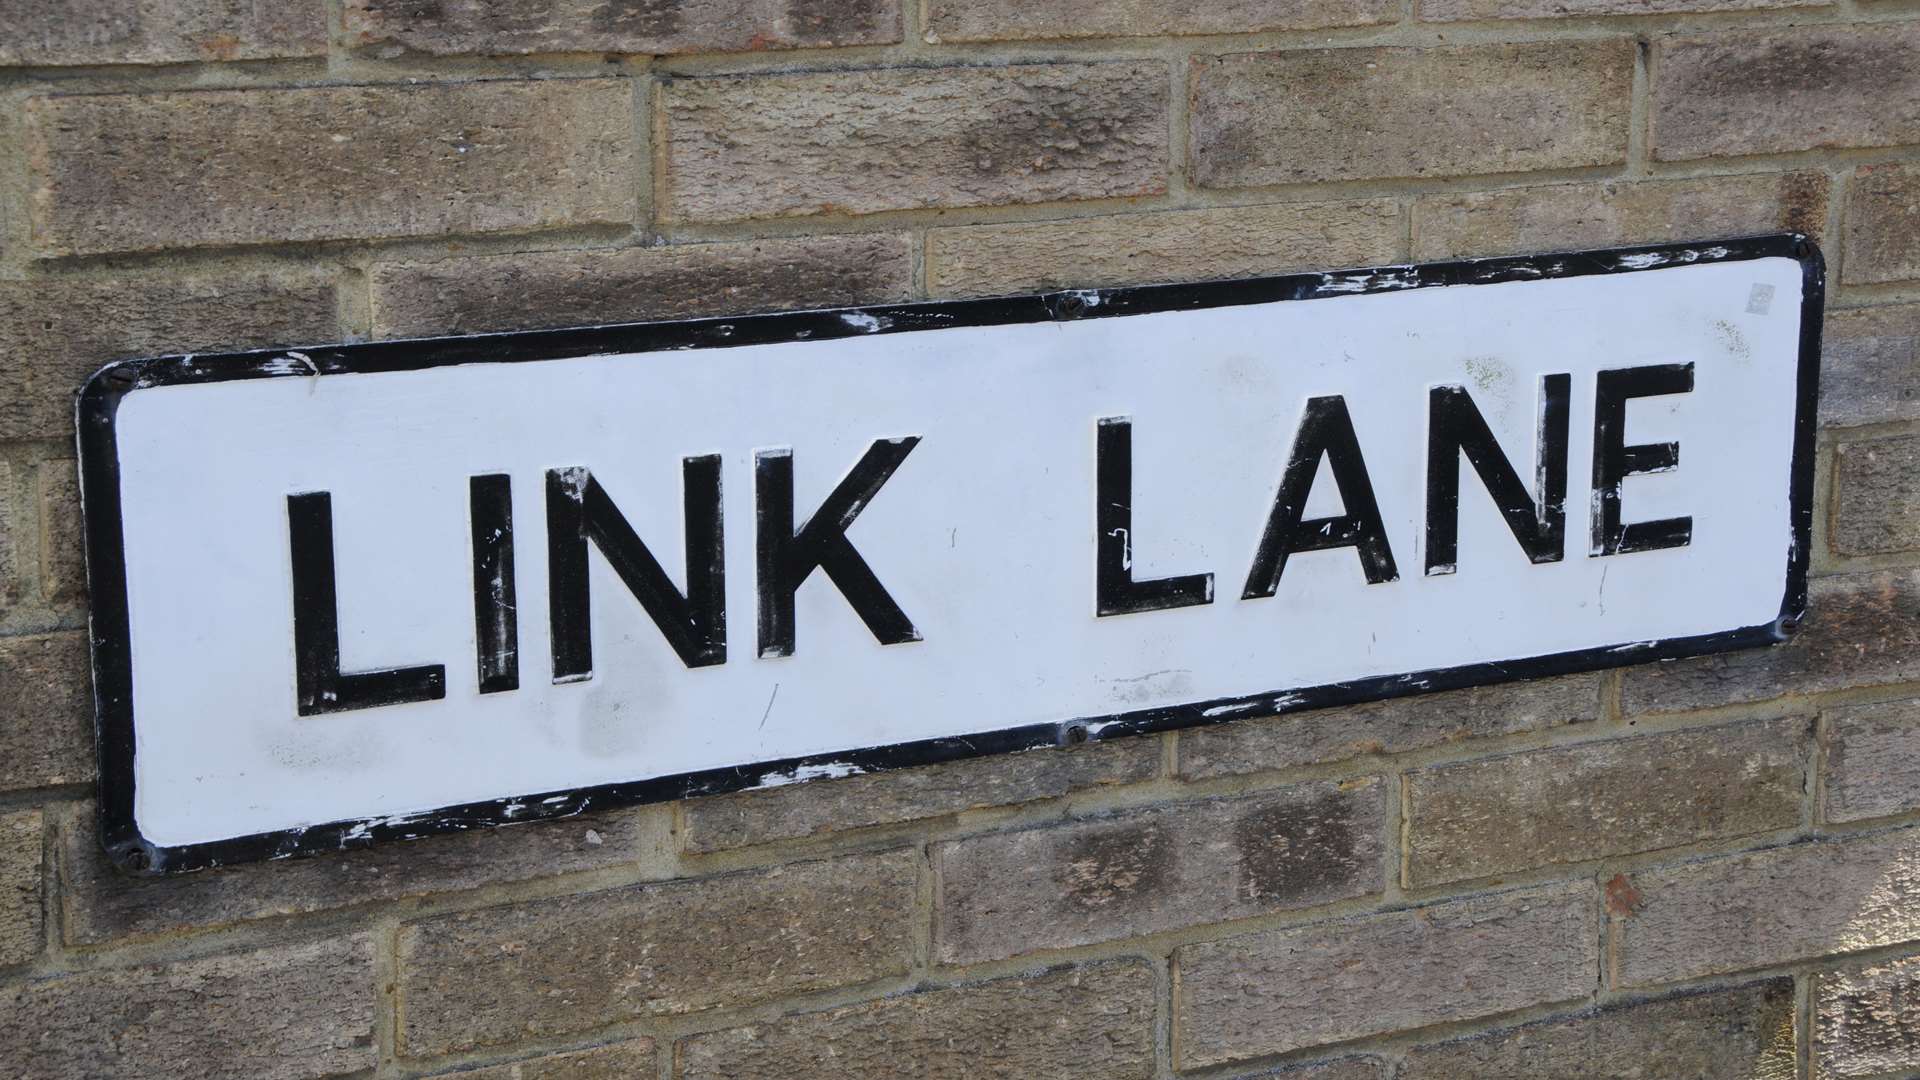 The girl claimed she had been attacked in Link Lane